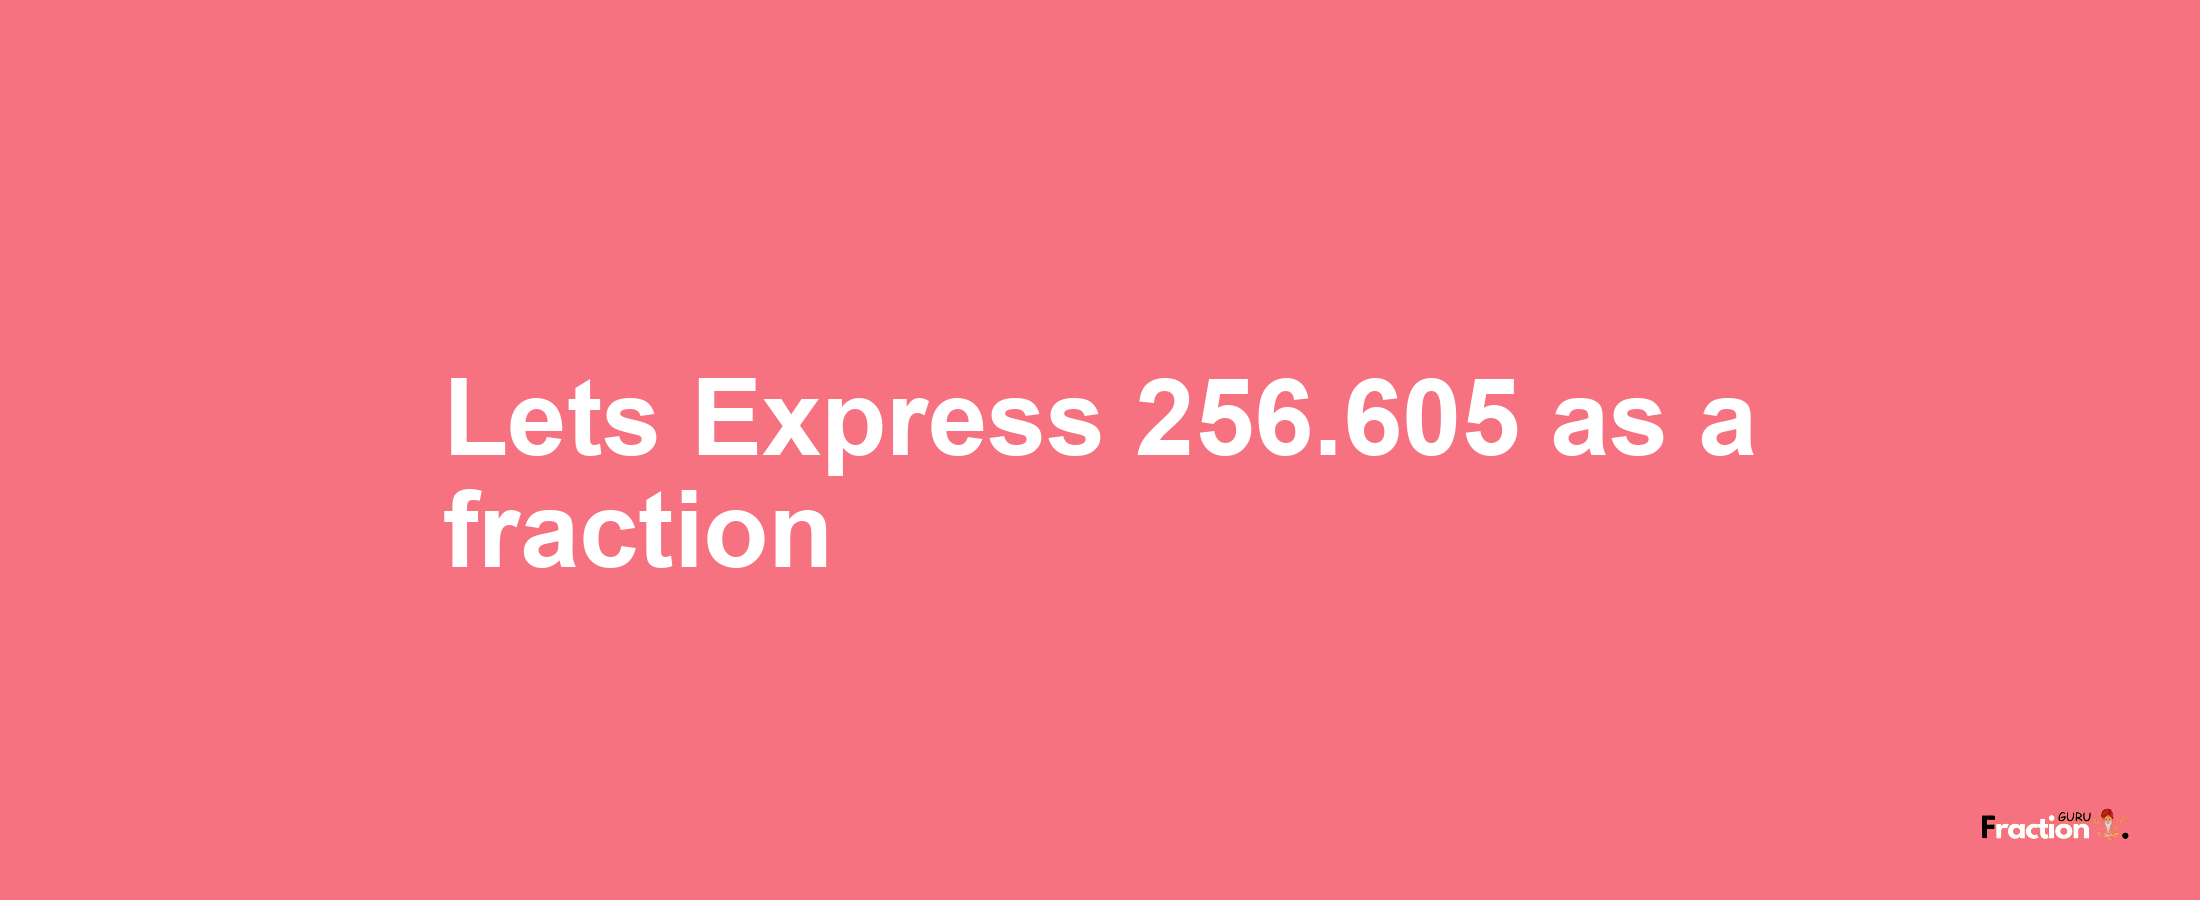 Lets Express 256.605 as afraction